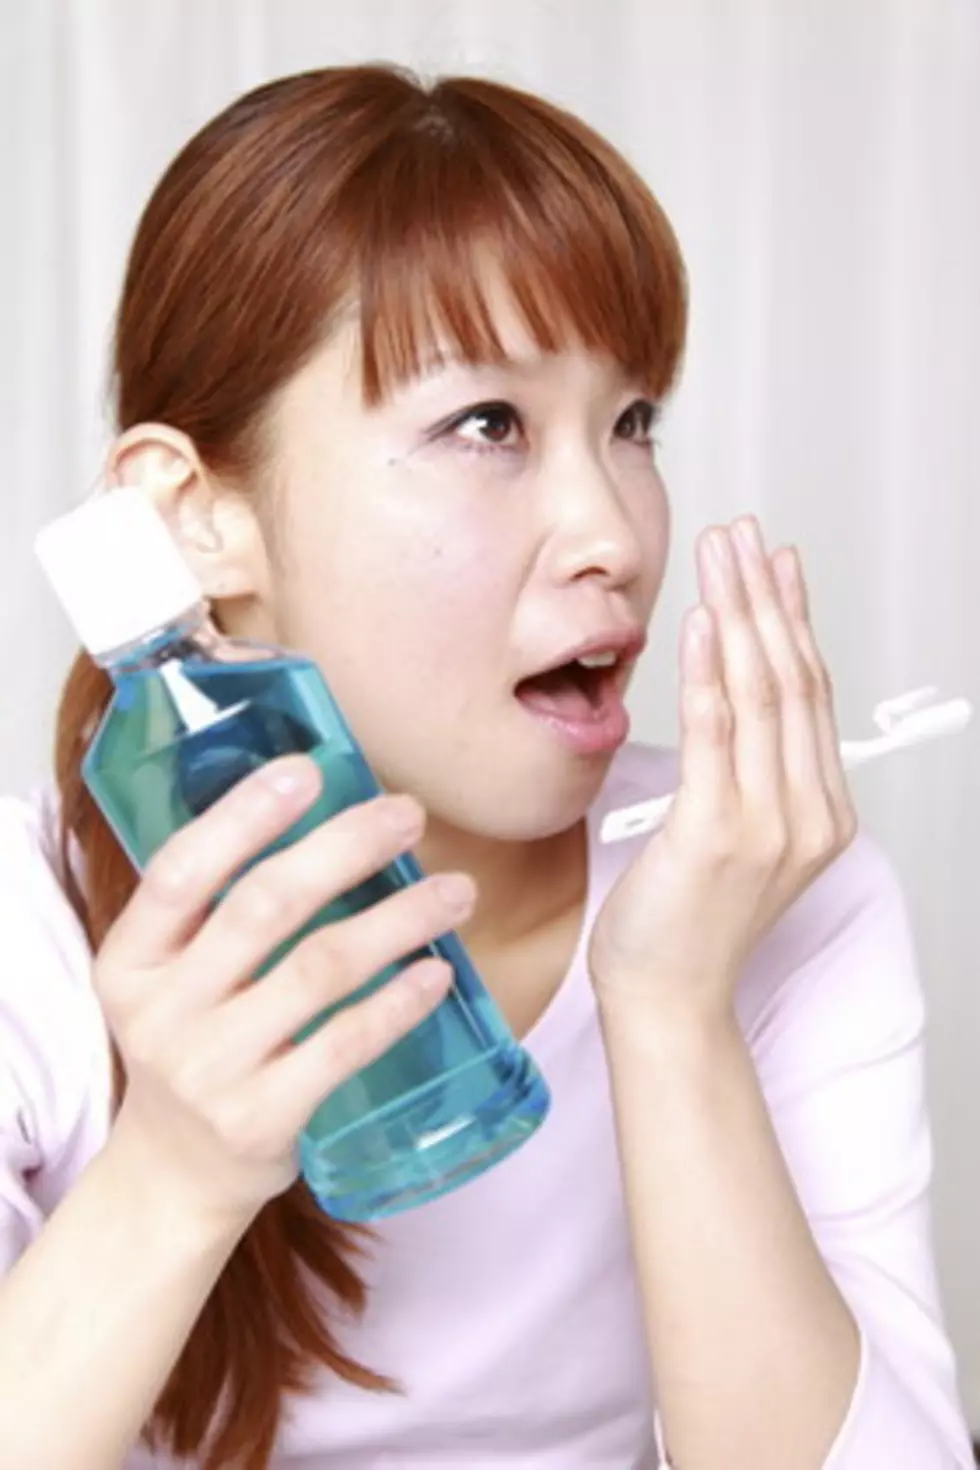 How To Fight Bad Breath